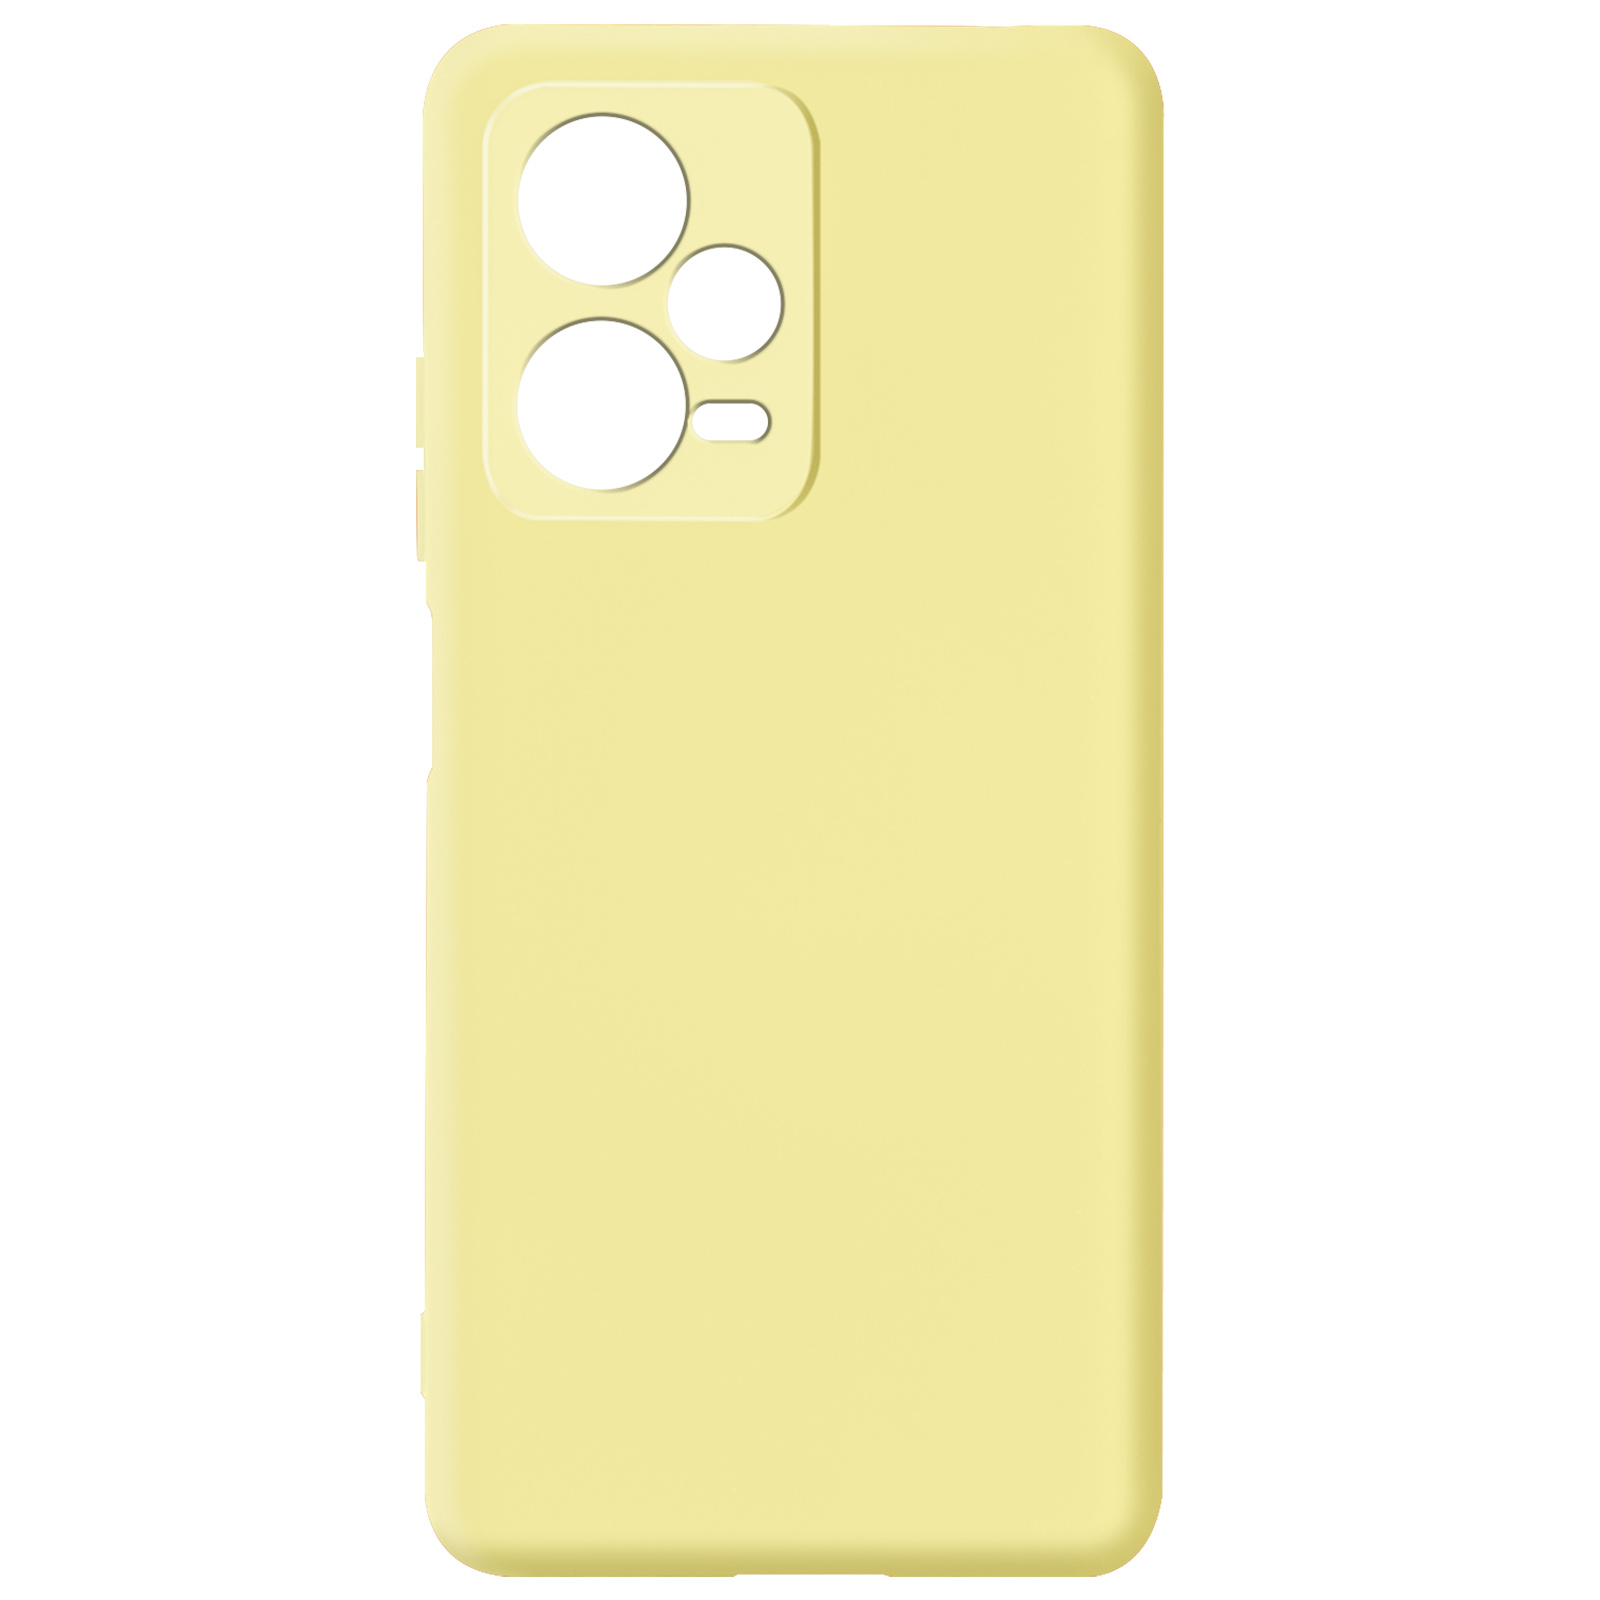 AVIZAR Soft Touch Series, Backcover, Redmi Pro Plus, Xiaomi, Gelb 12 Note